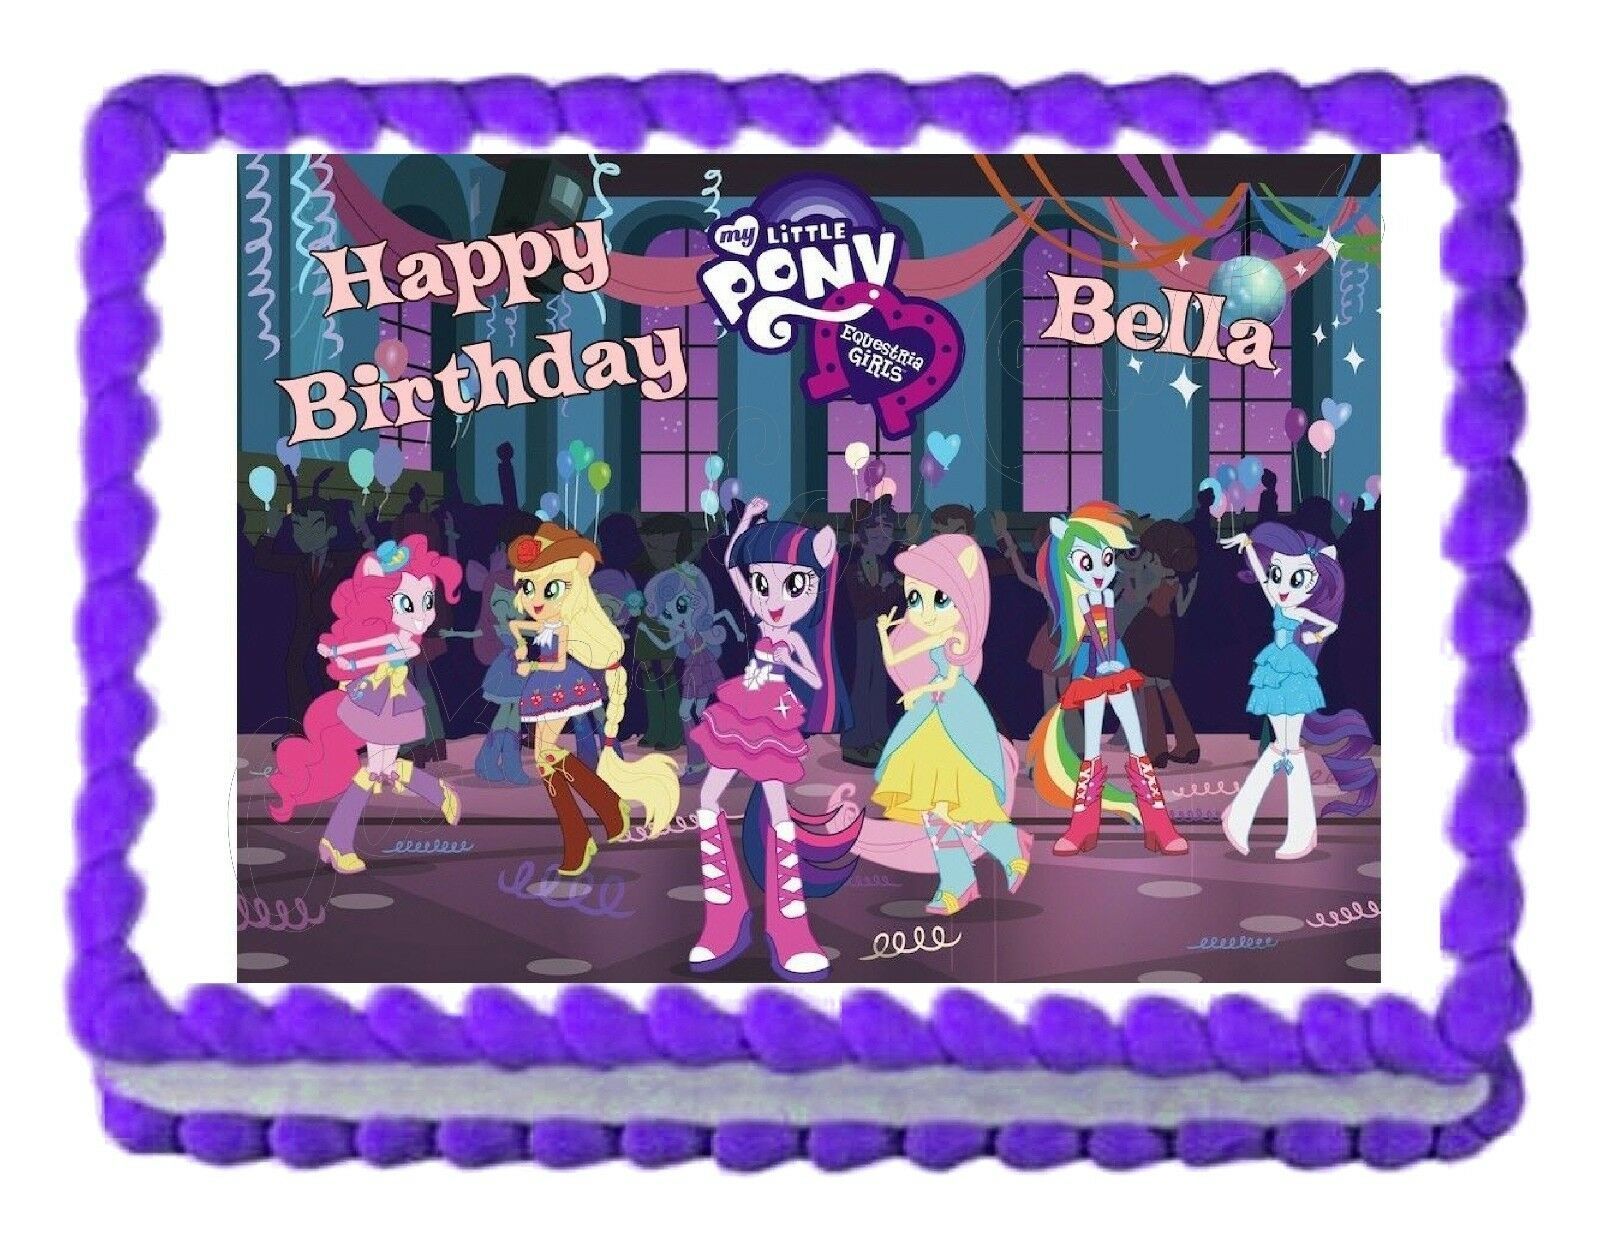 My Little Pony Equestria Girls Edible Cake Image Cake Topper - $9.99 - $11.49